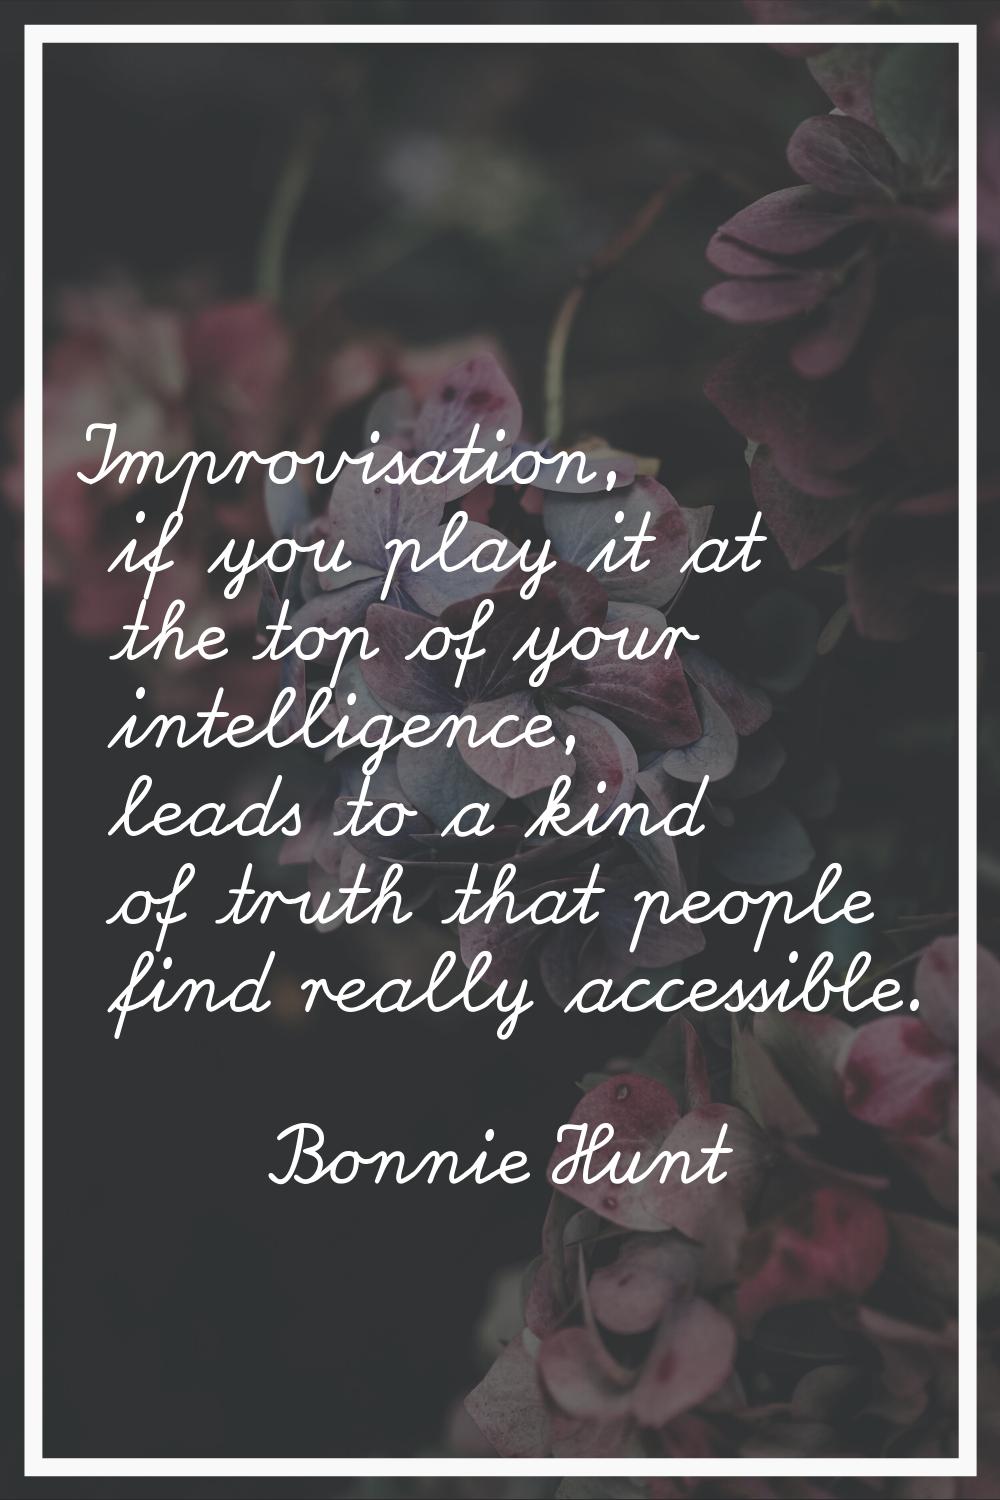 Improvisation, if you play it at the top of your intelligence, leads to a kind of truth that people